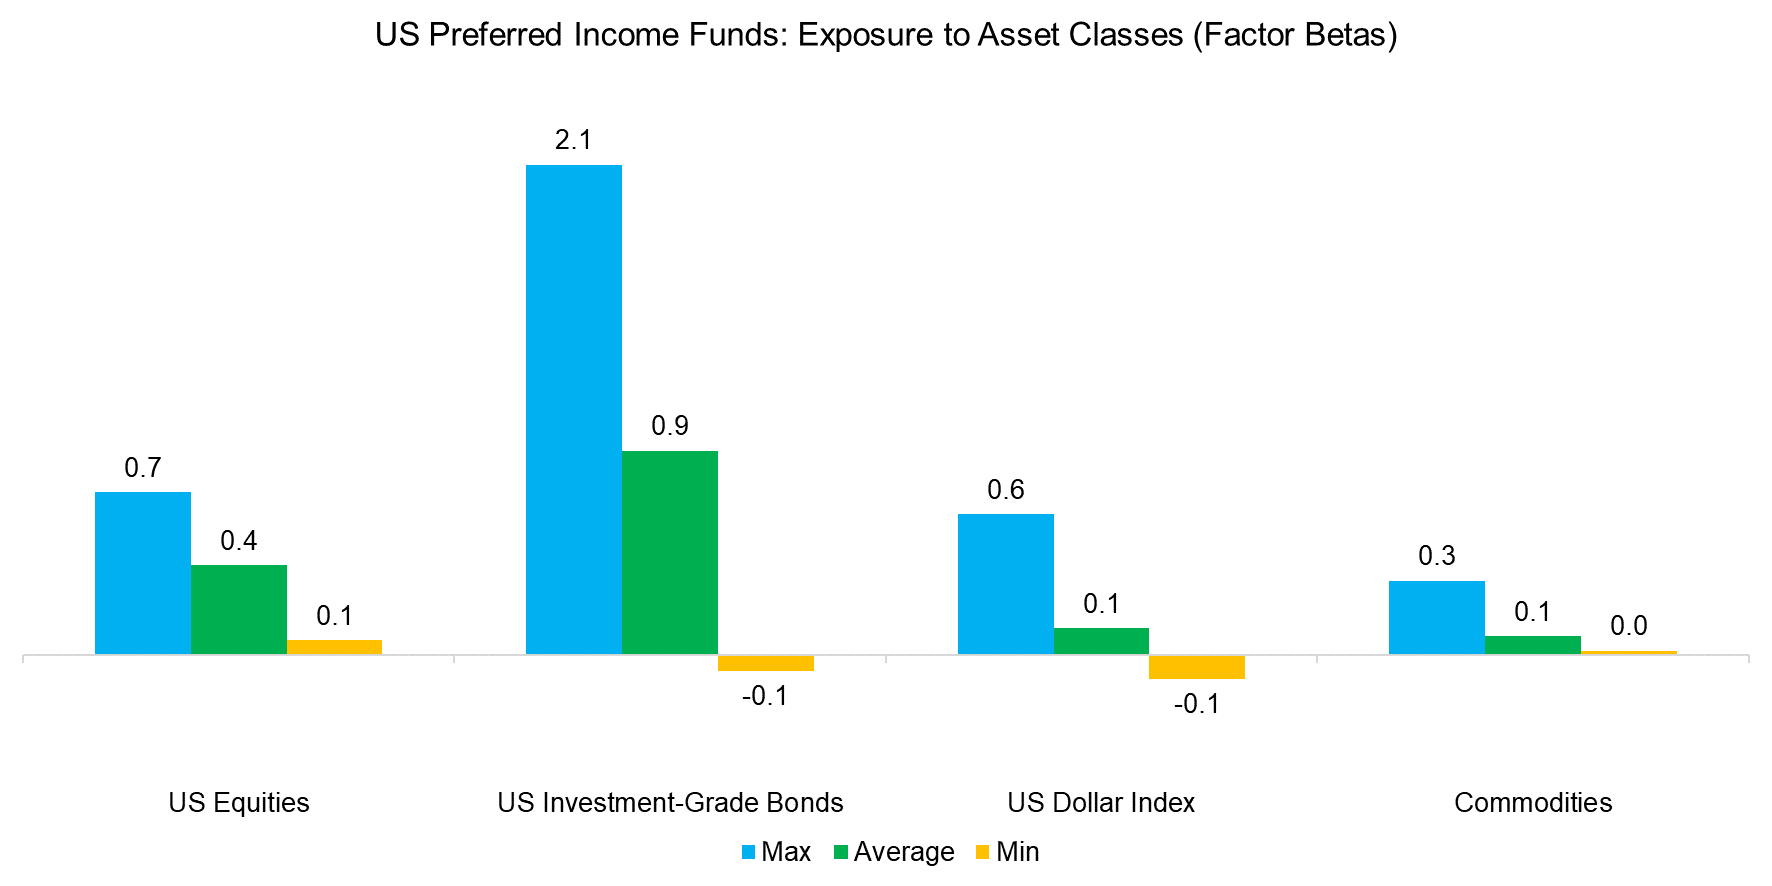 US-Preferred-Income-Funds-Exposure-to-Asset-Classes-Factor-Betas